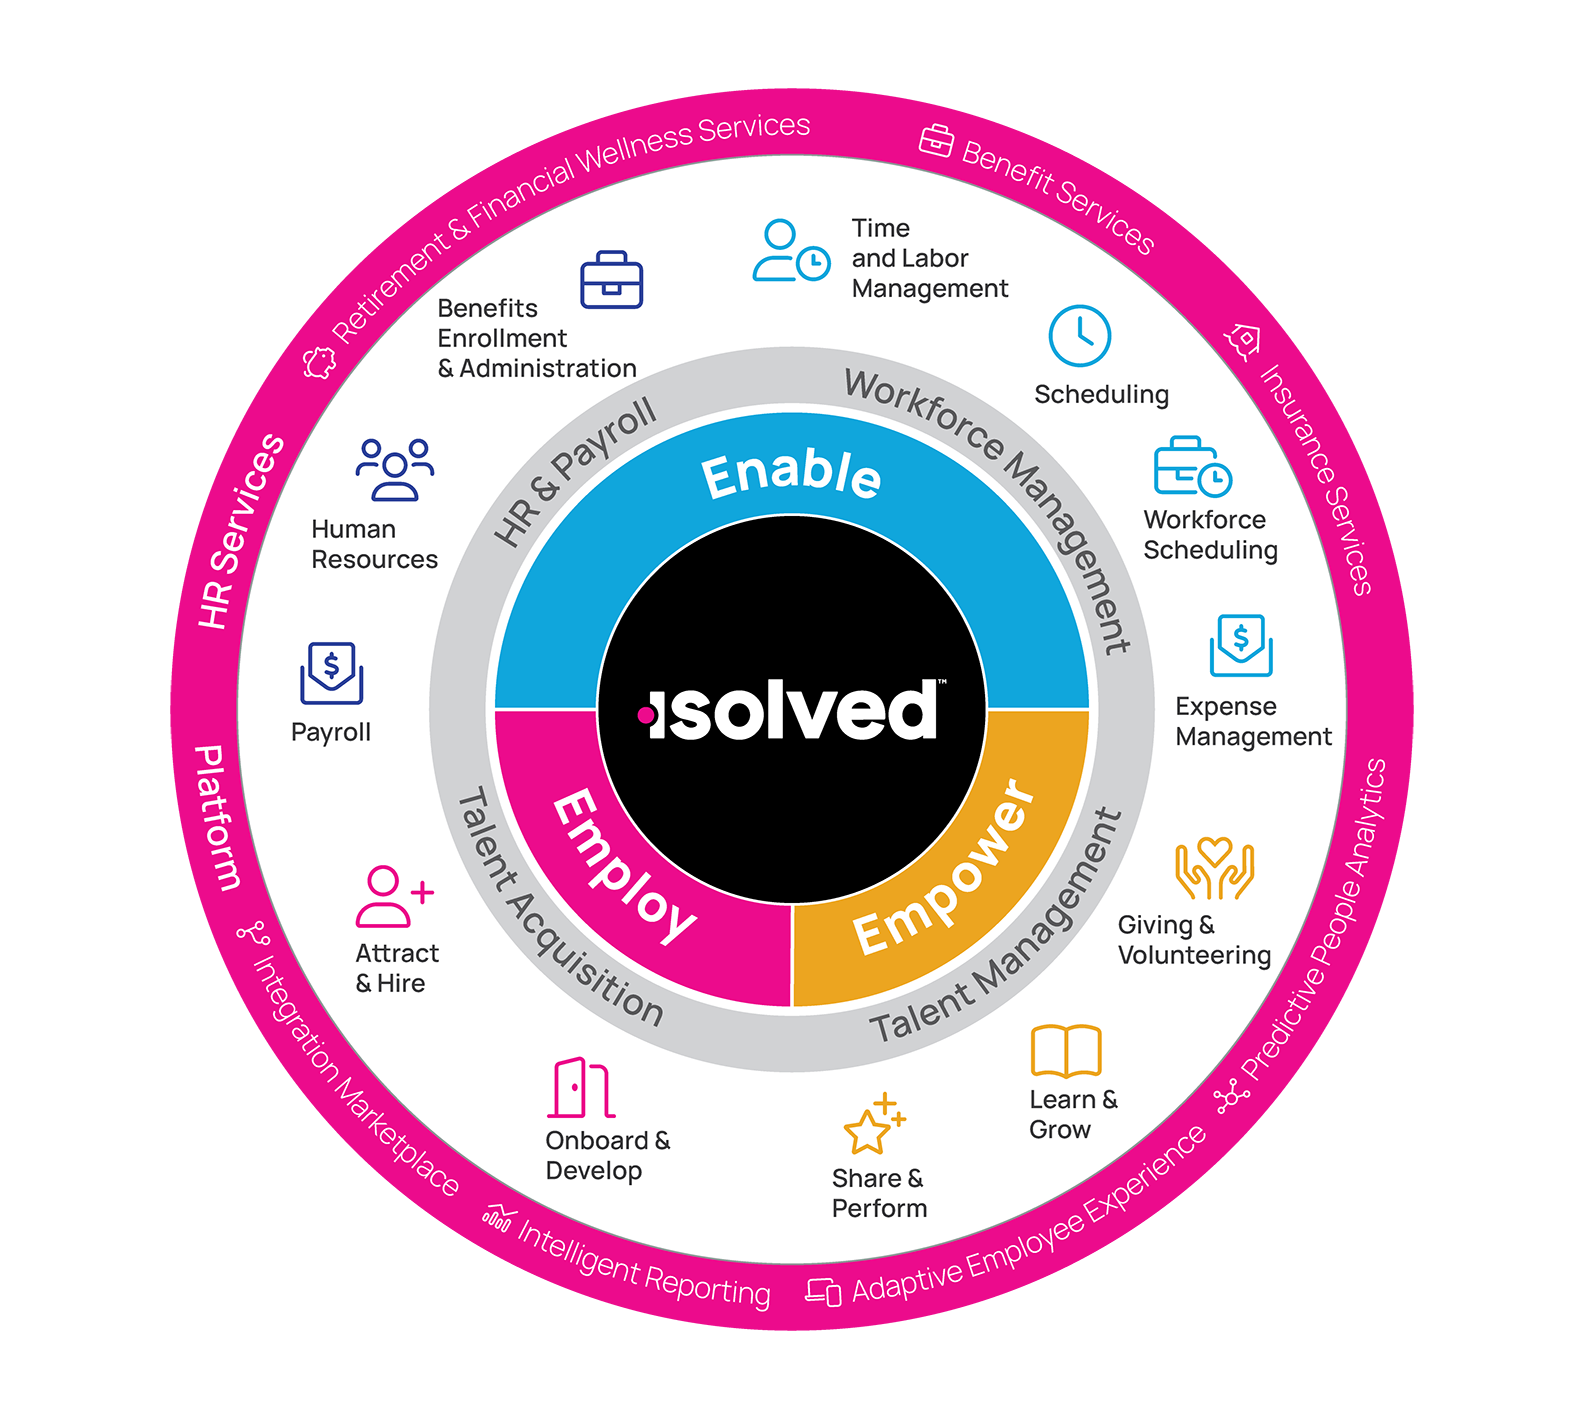 Enable, Empower, and Employ - with isolved